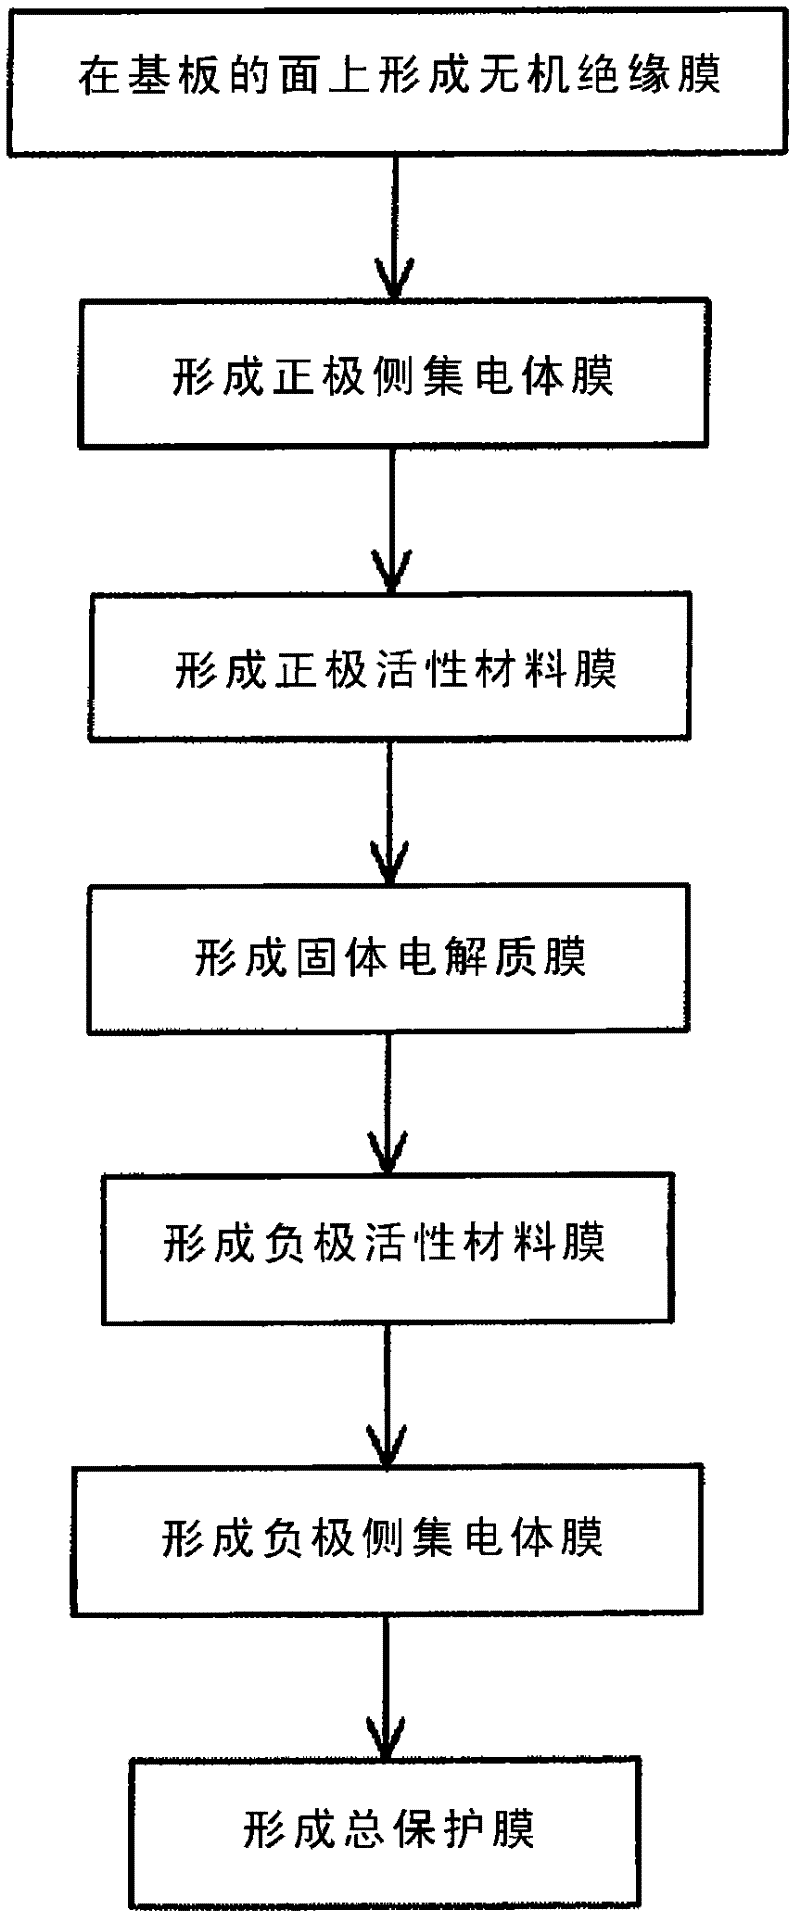 Thin film solid lithium ion secondary battery and manufacturing method thereof